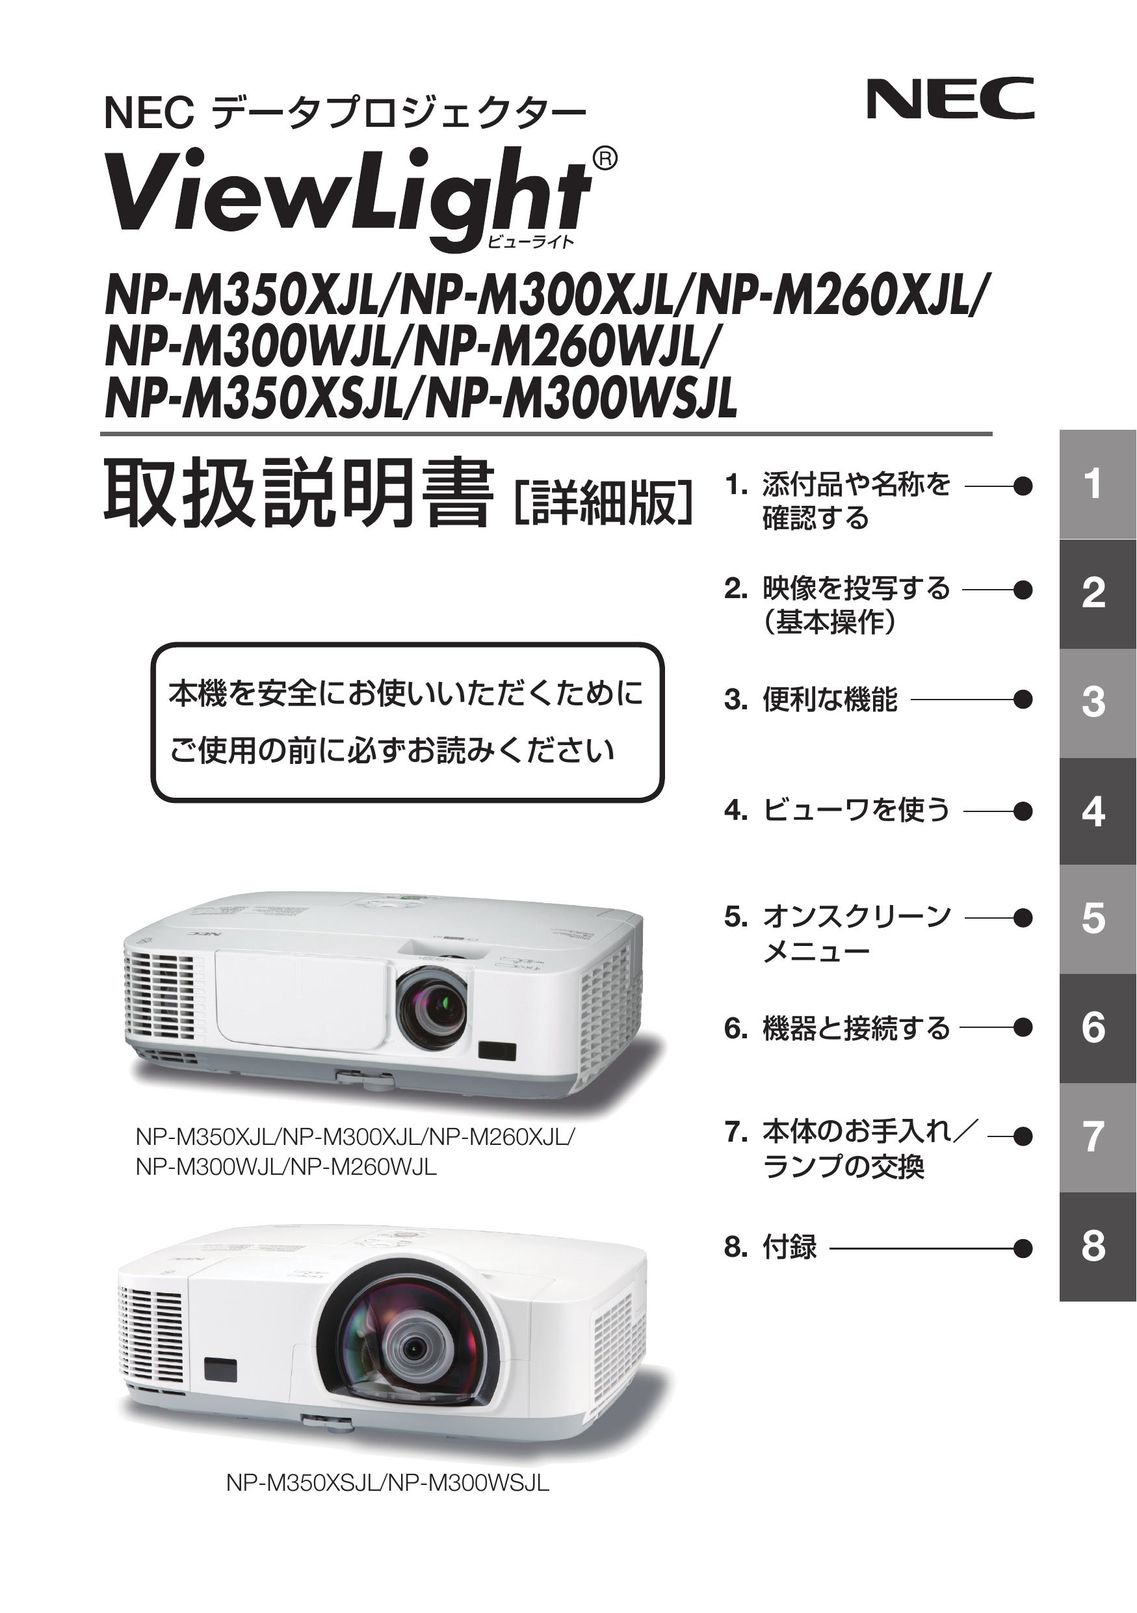 NEC NP-M300WSJL Home Theater System User Manual